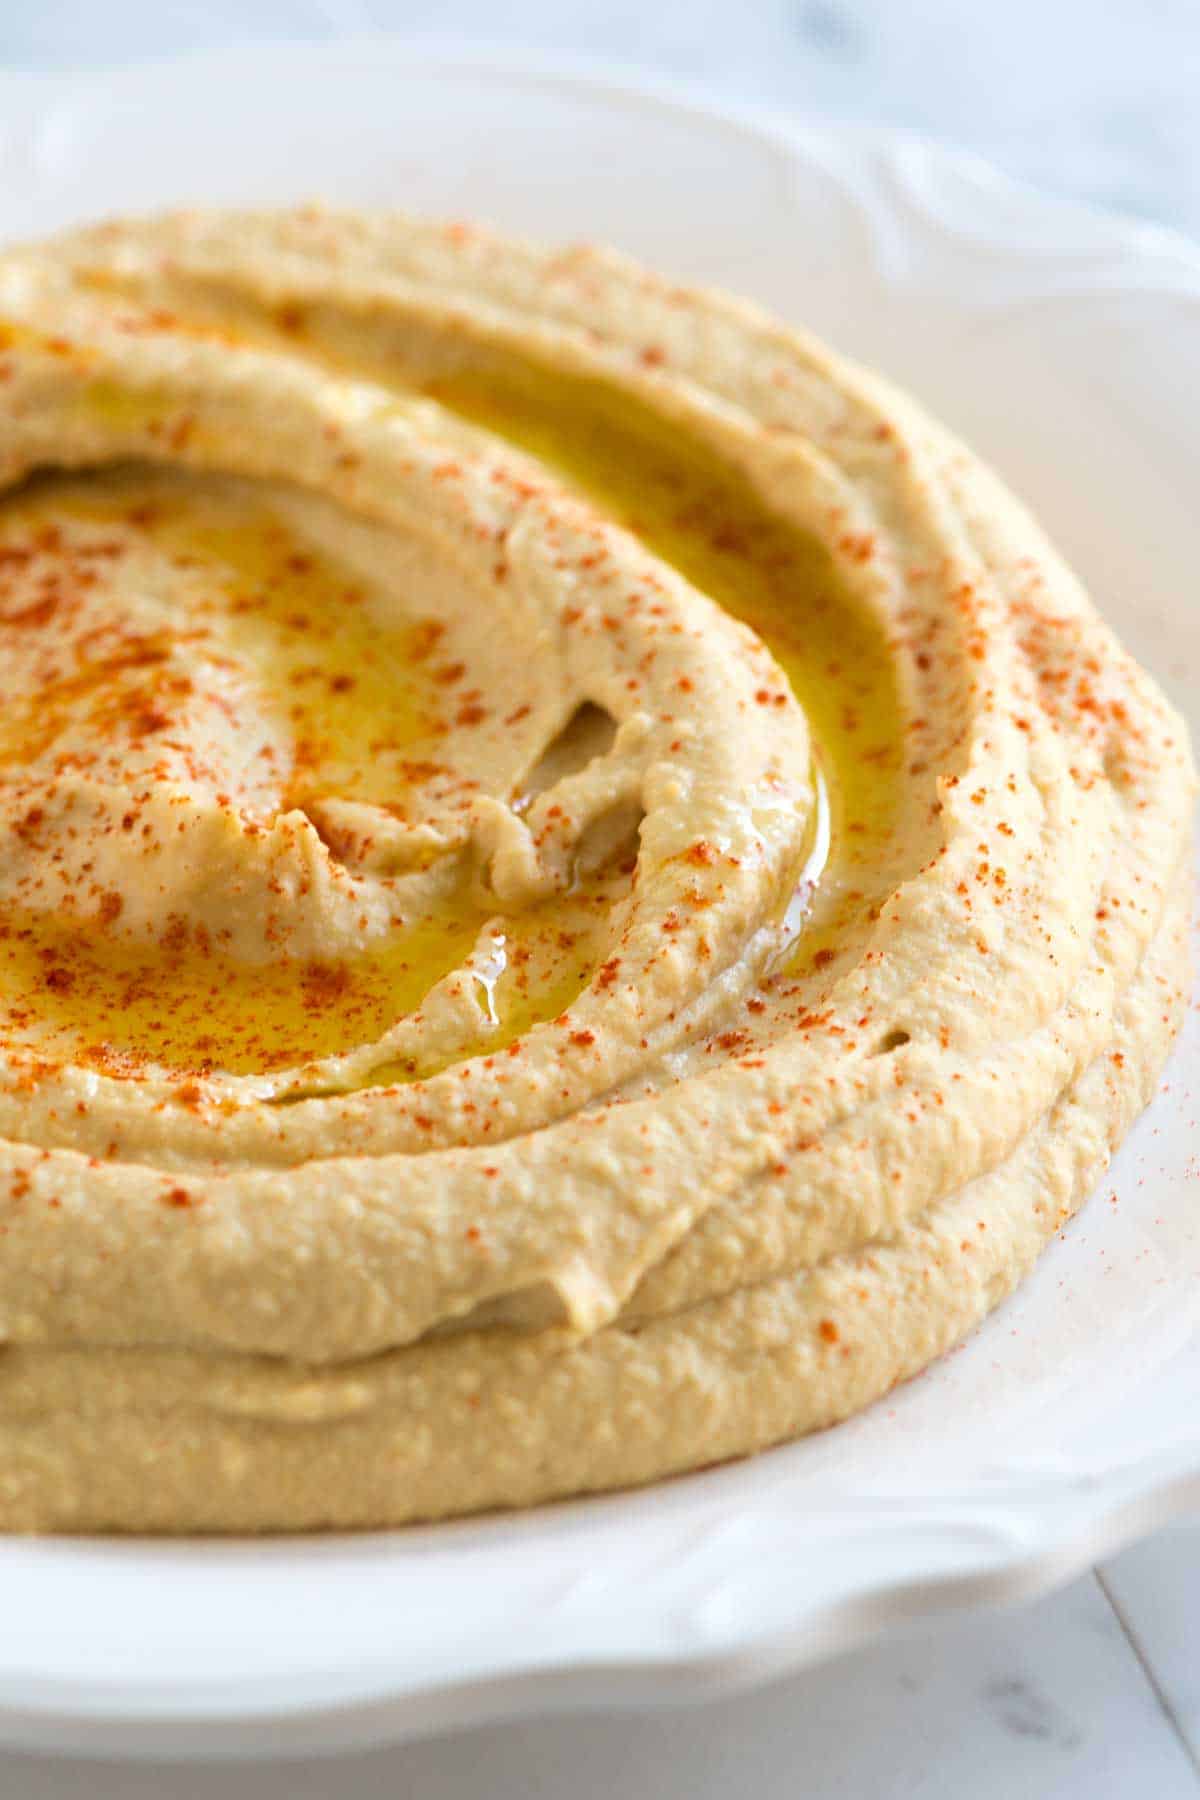 A close-up shot of hummus on a white plate and garnished with olive oil and paprika.